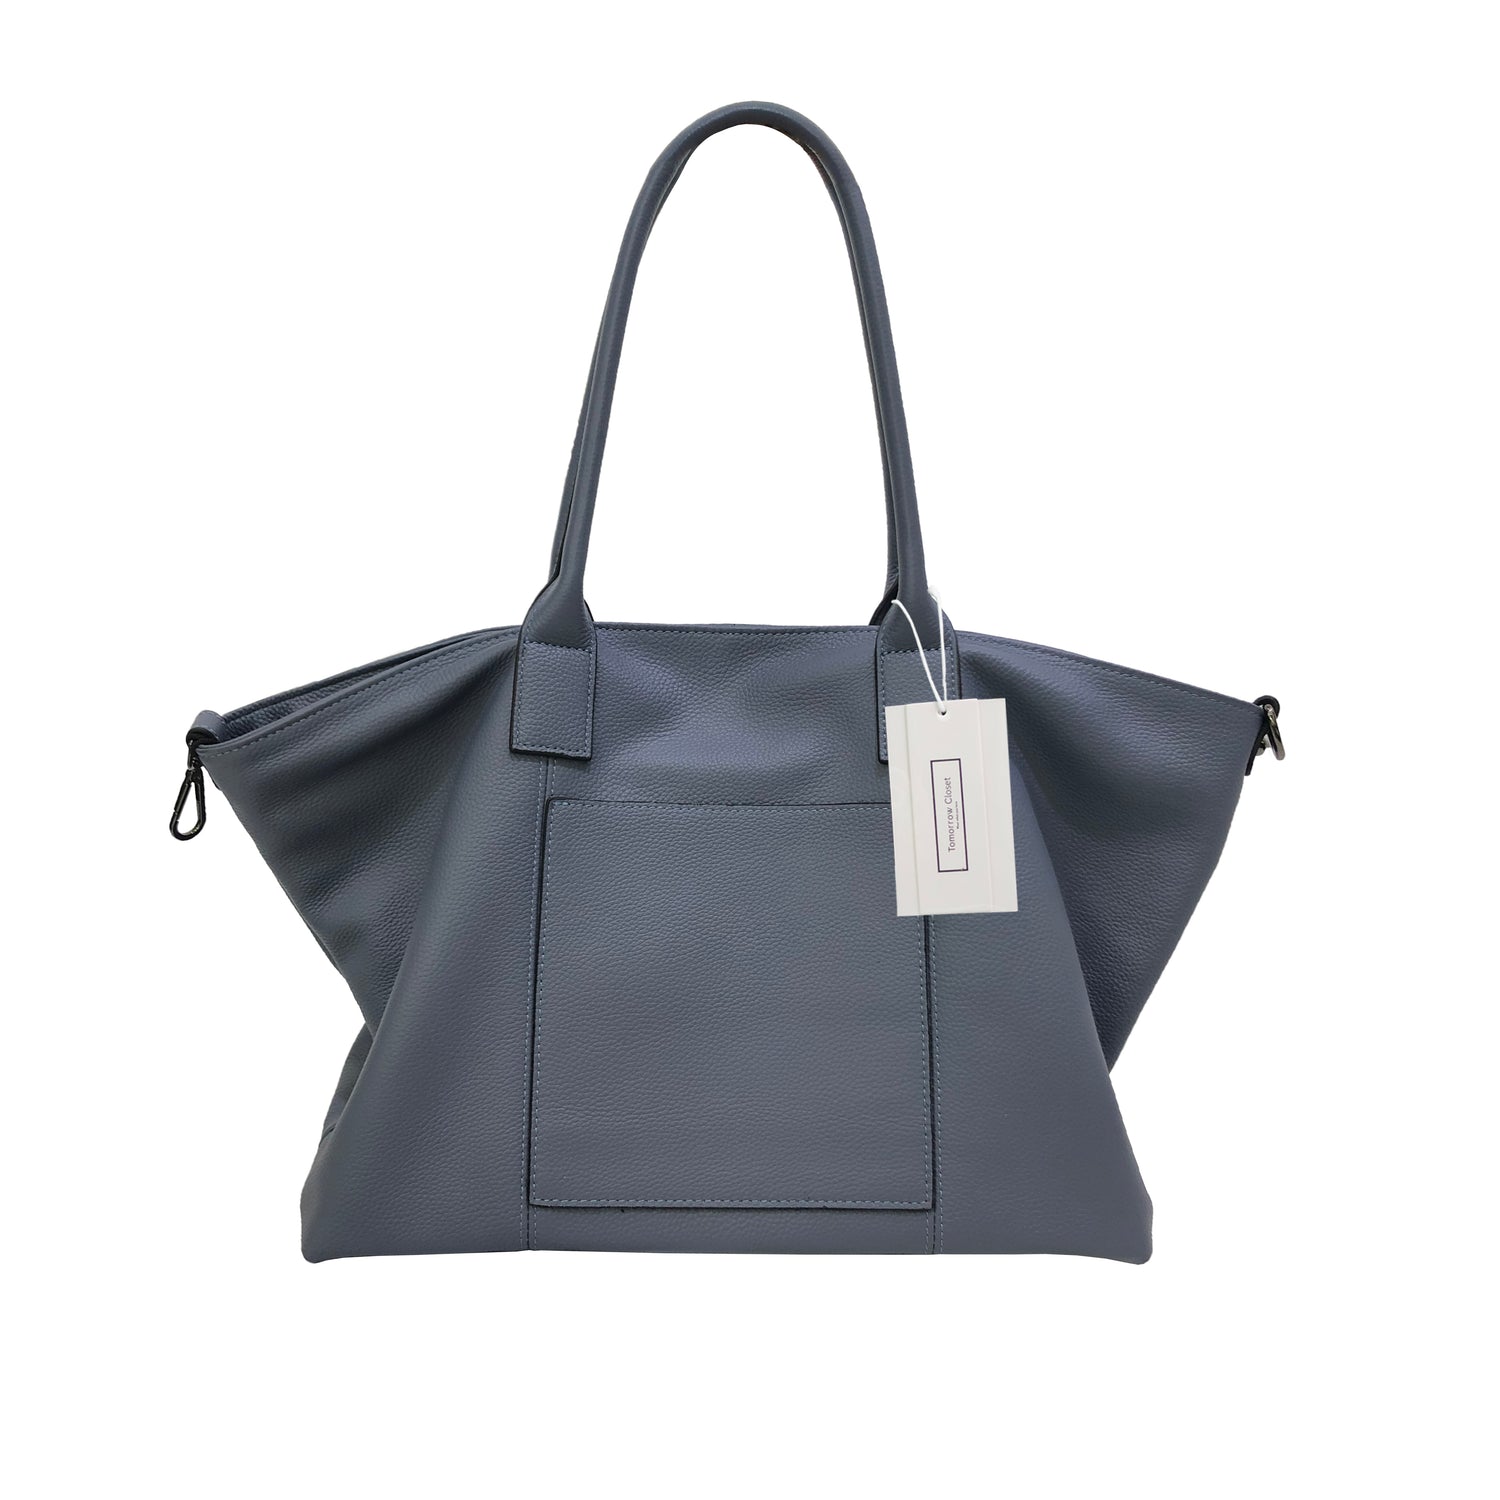 Tote / Large bags